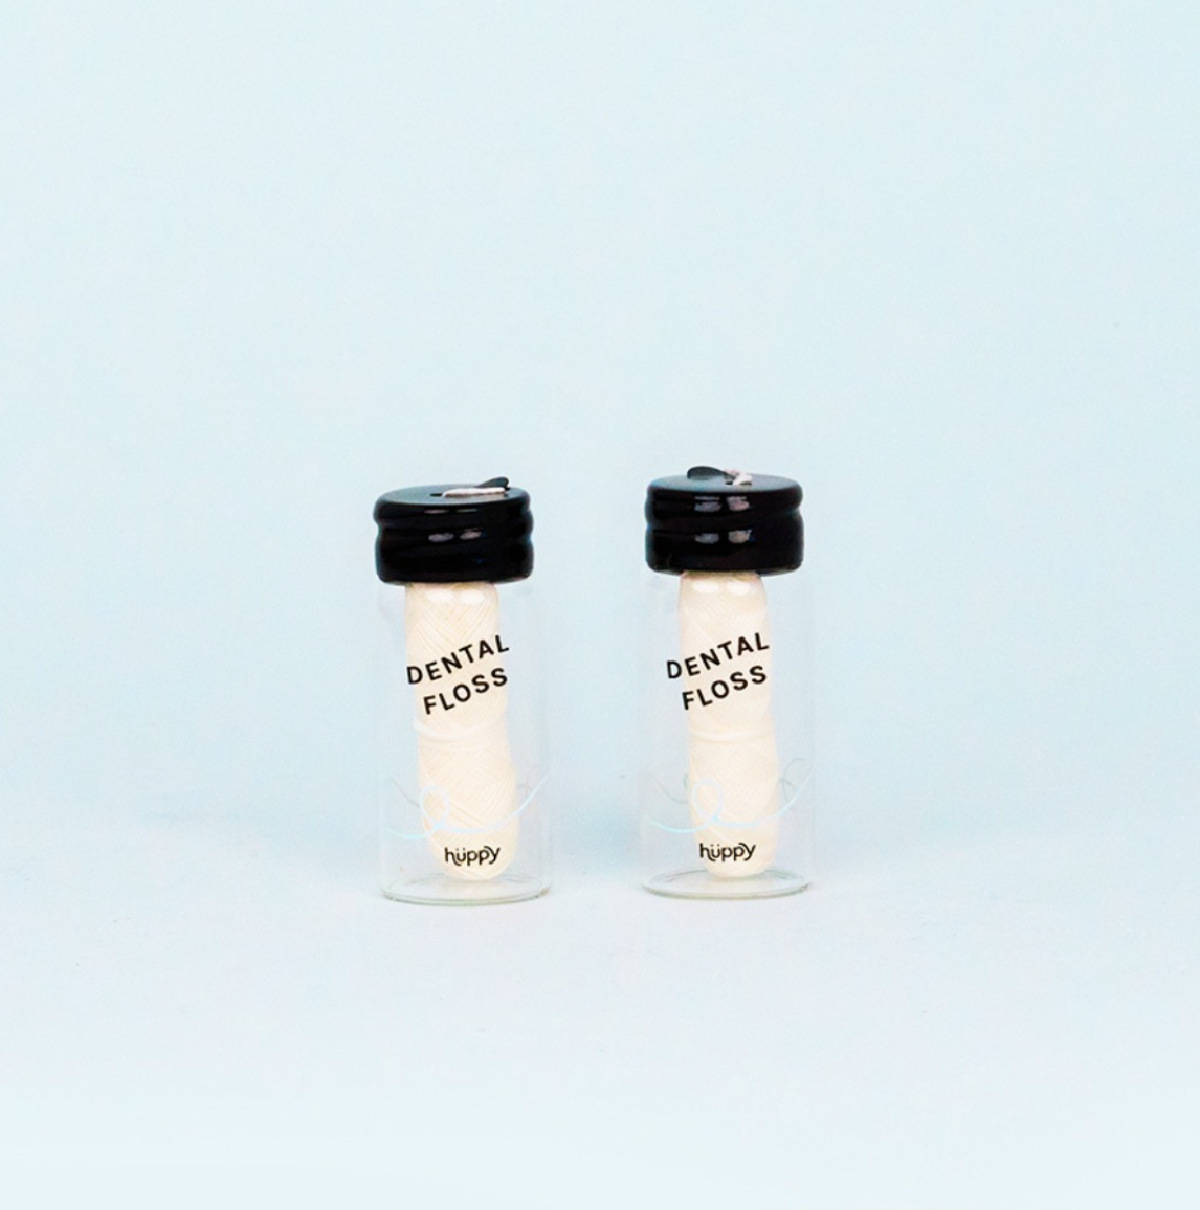 Two glass containers of Huppy floss with black lids against a pale blue background.